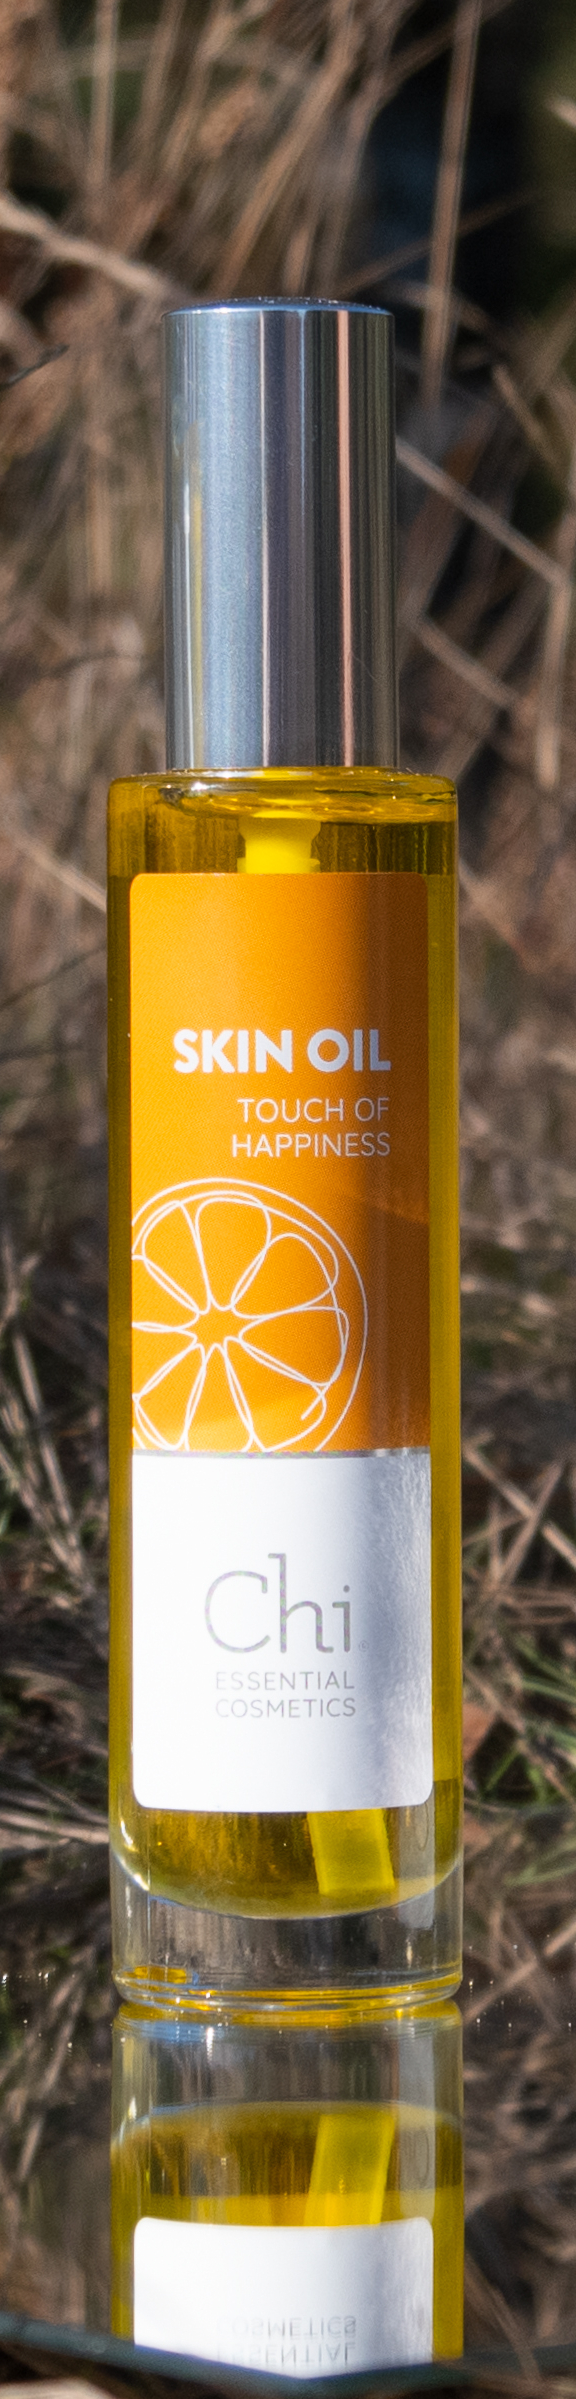 Skin Oil A Touch of Happiness Heide